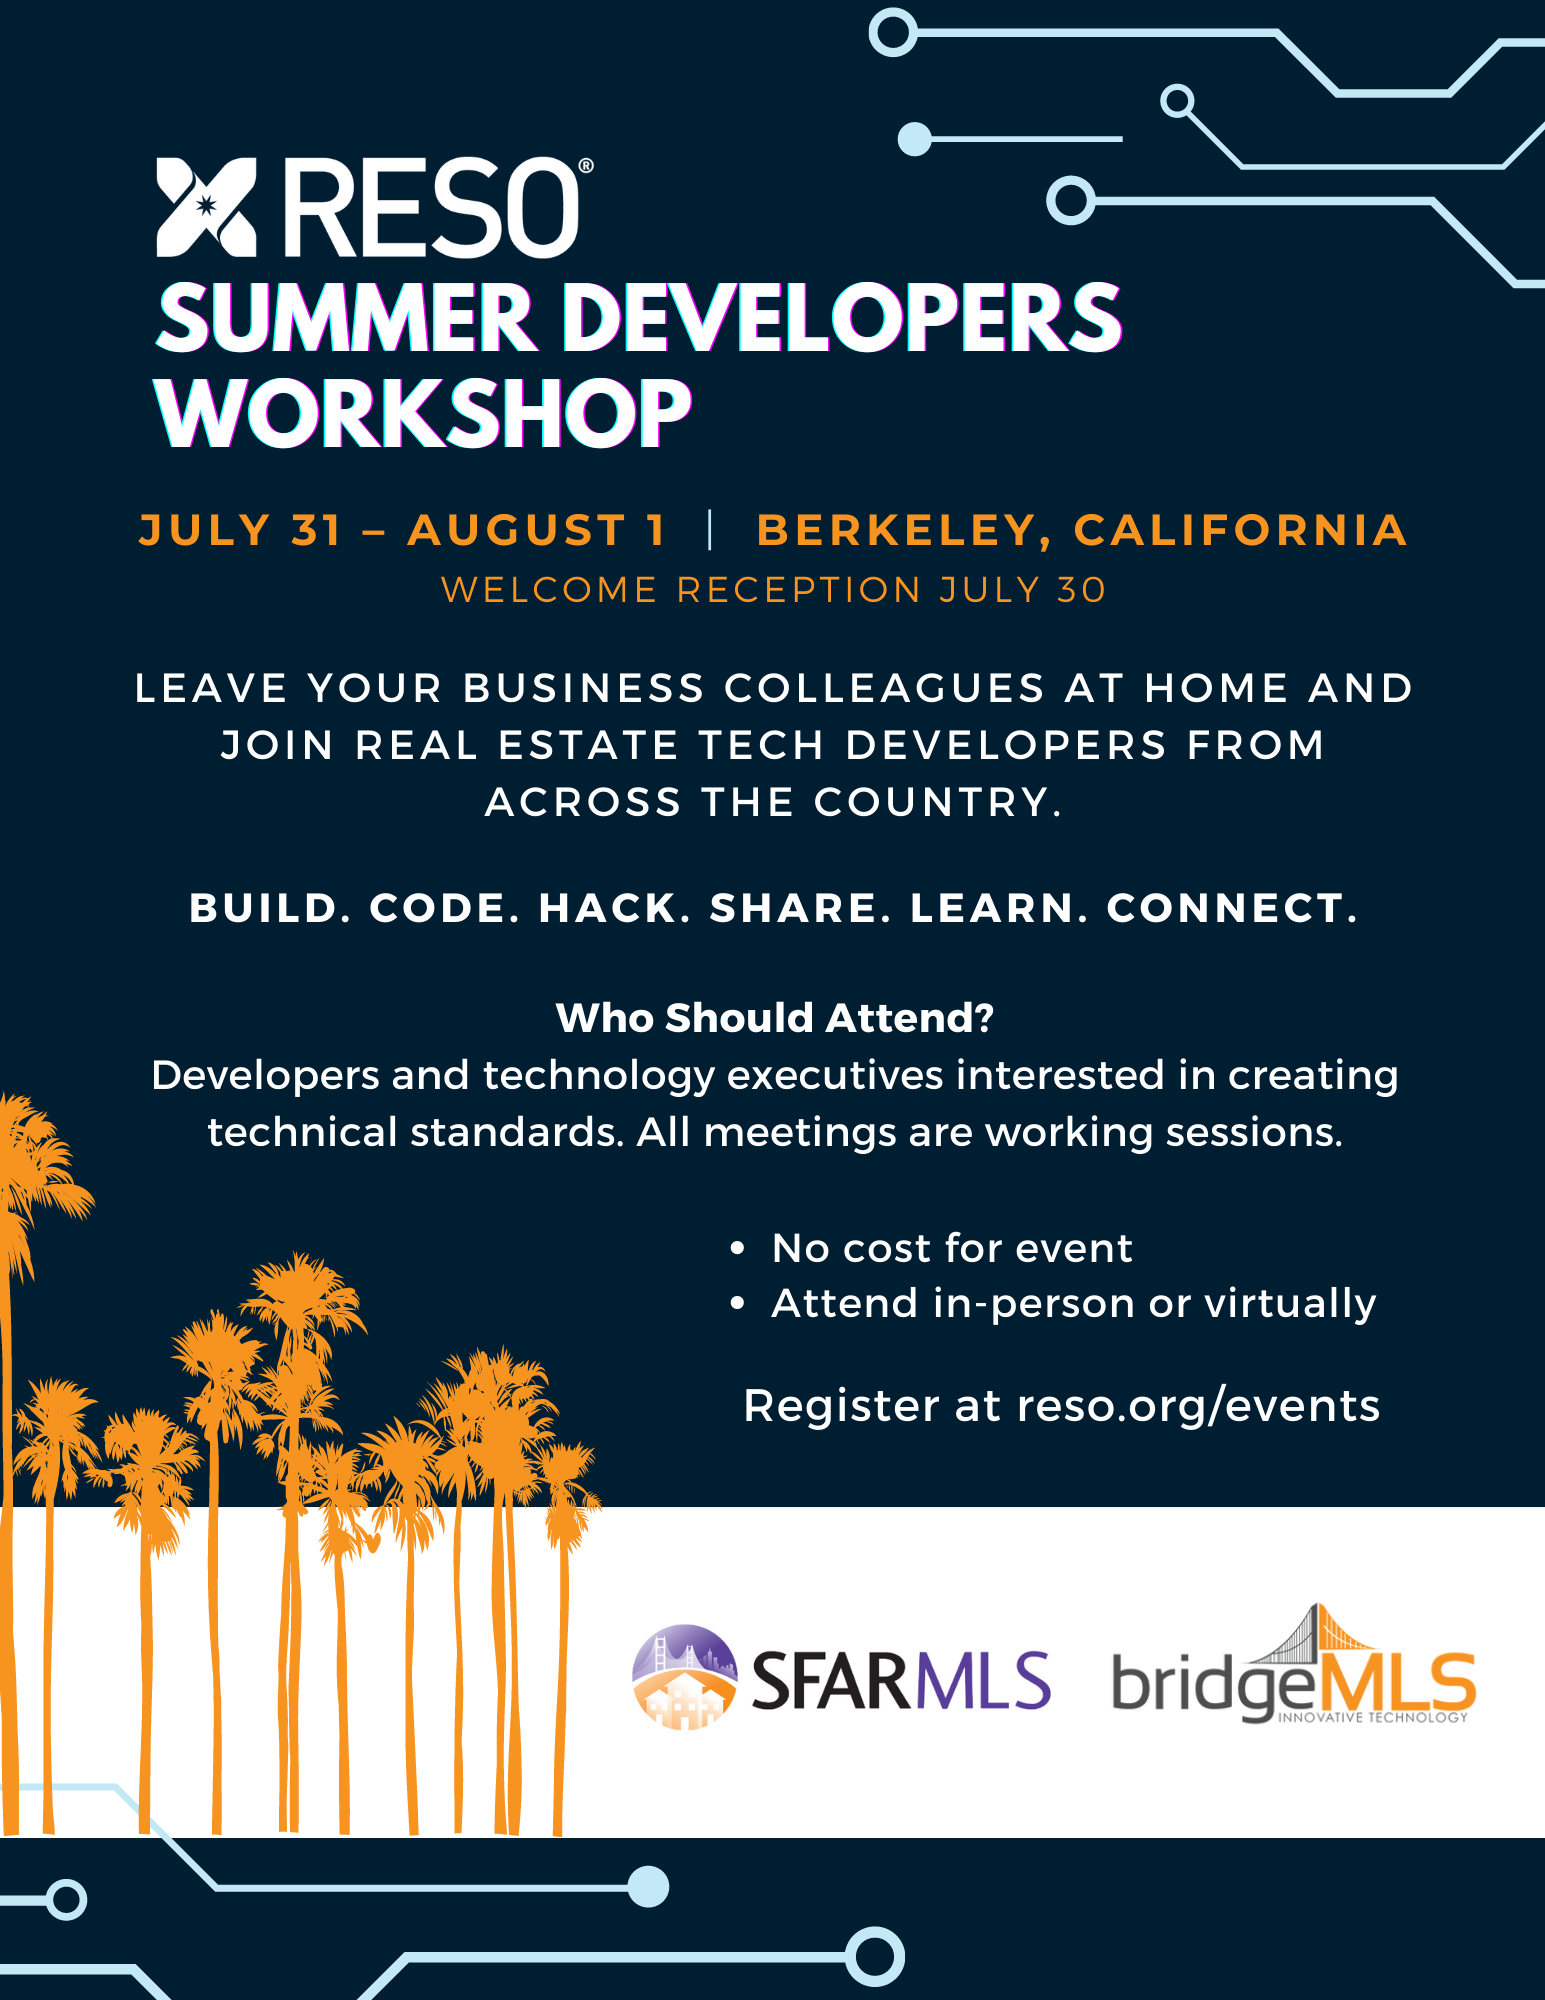 Developers and technology executives: create new technical standards with your peers by attending the RESO 2023 Summer Developers Workshop. Join virtually or in person in Berkeley, California from July 31 to August 1.